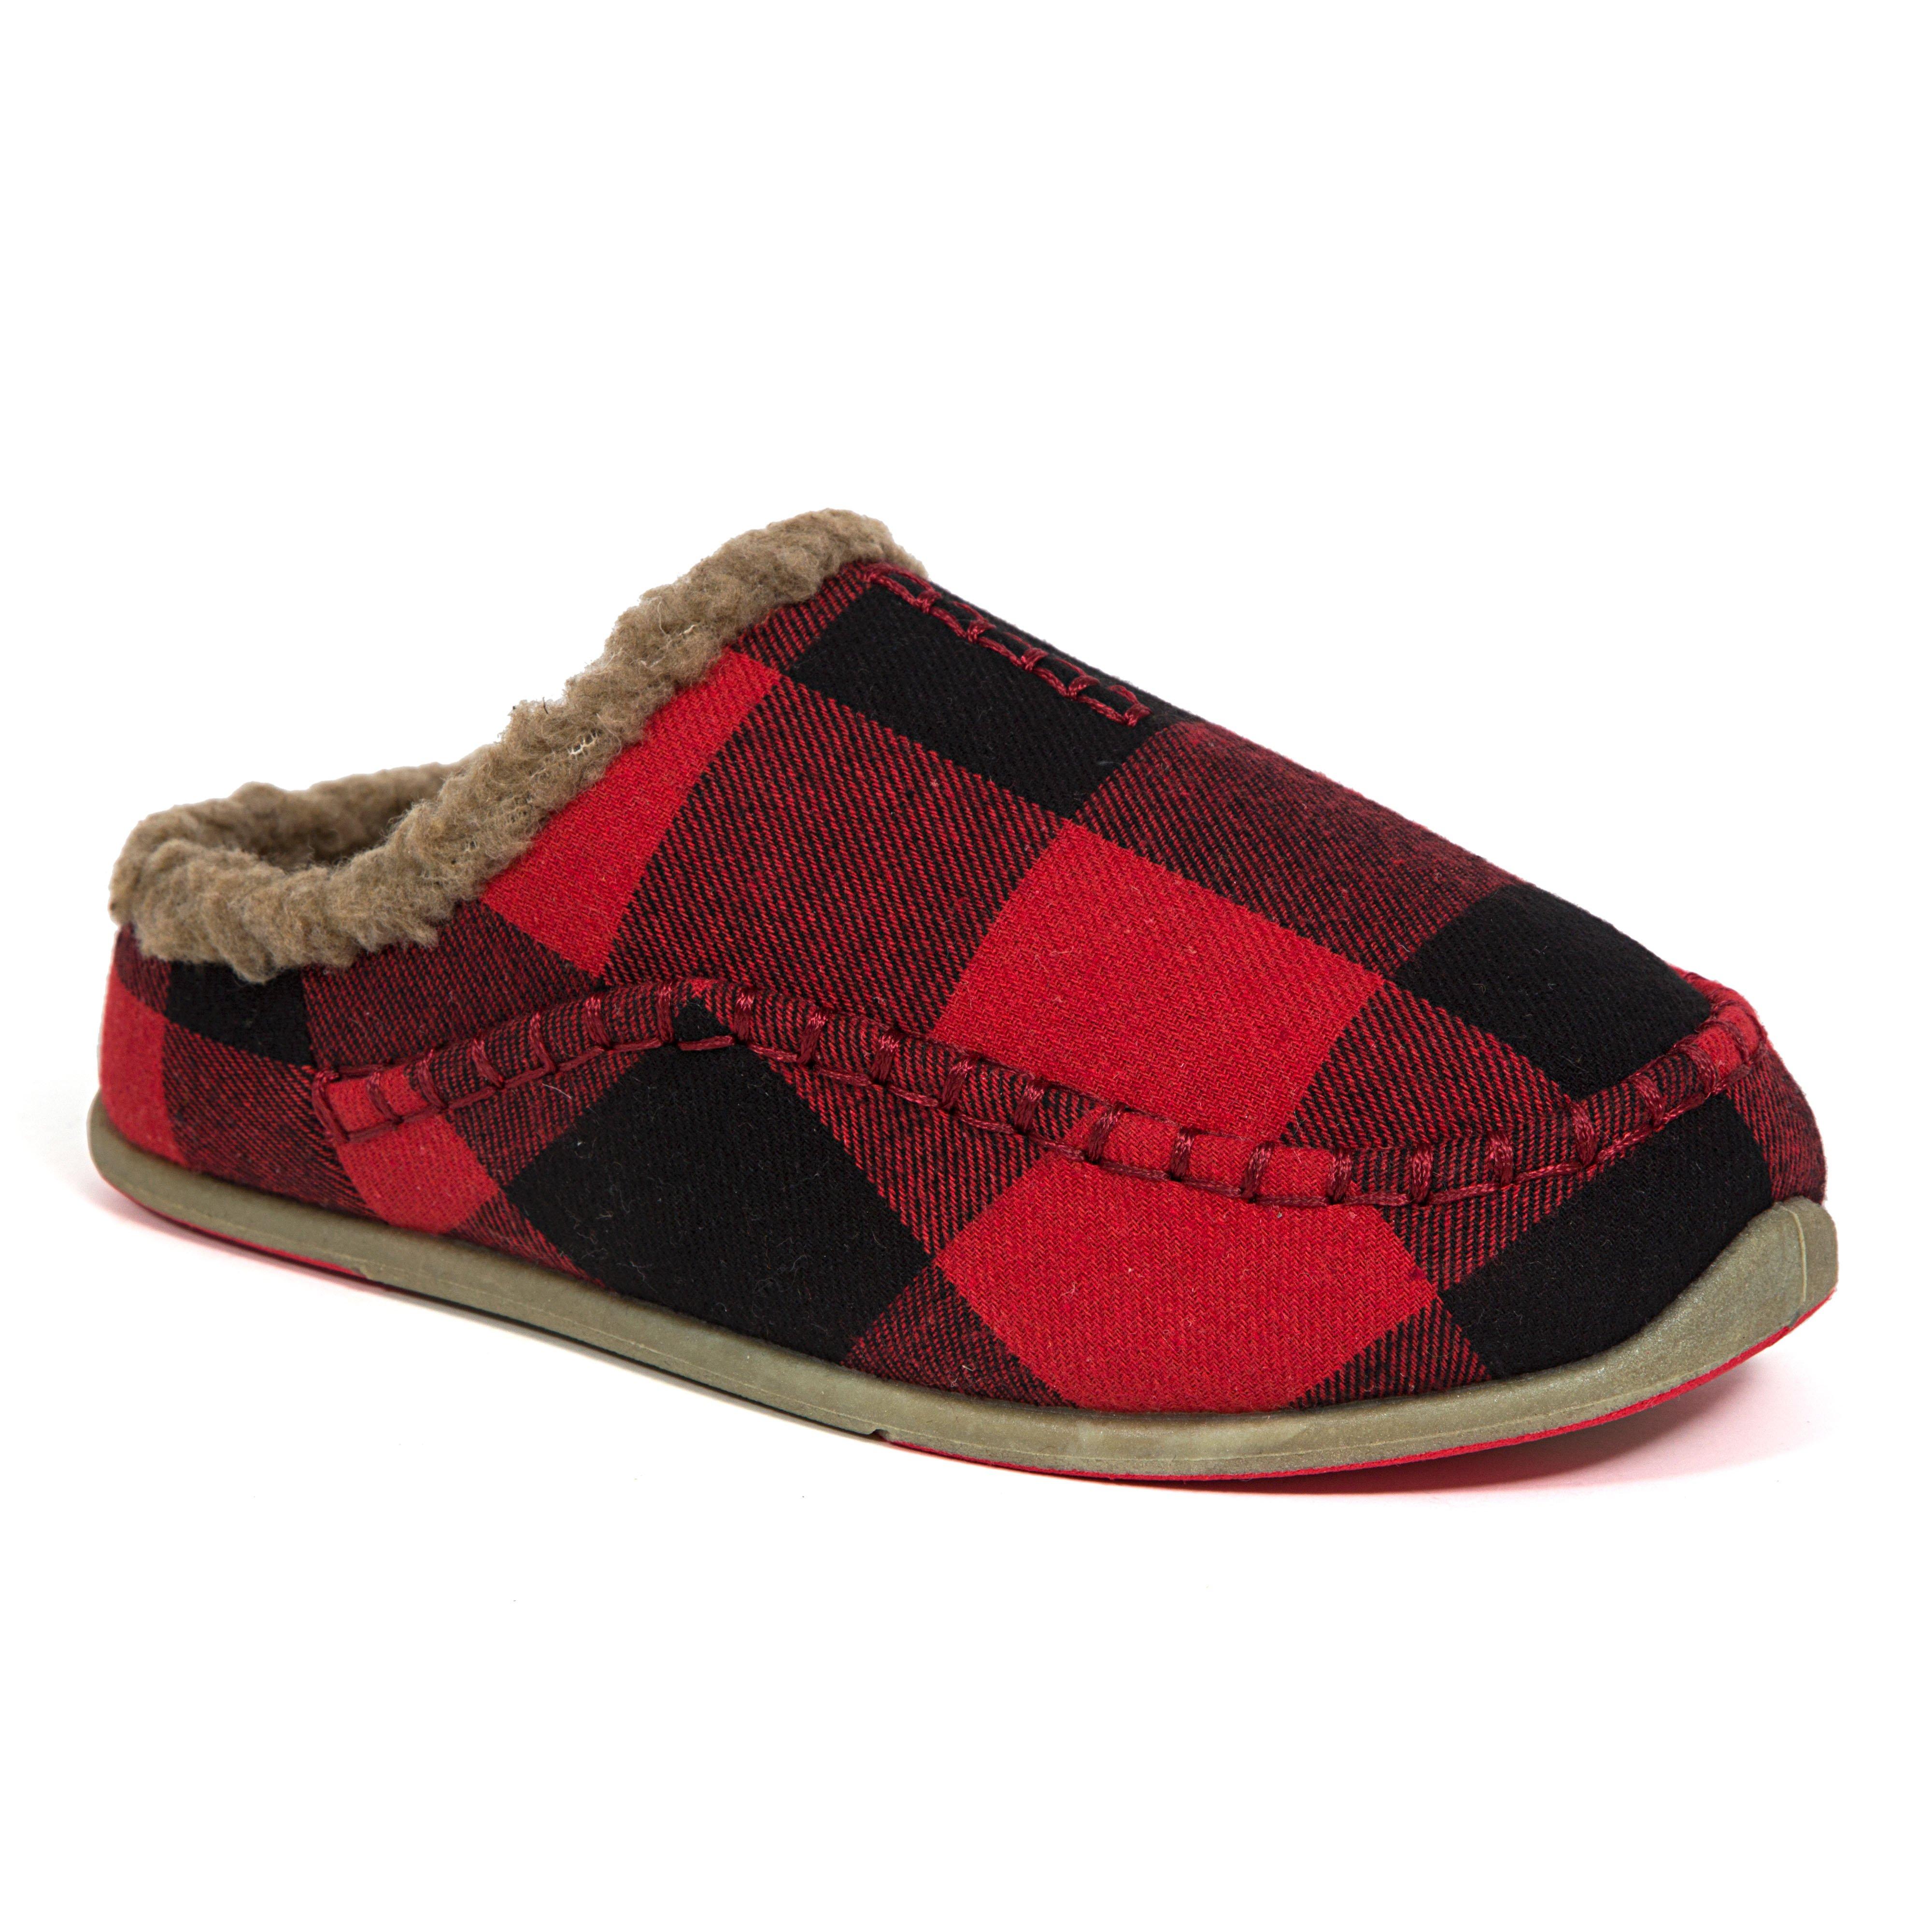 Boys Lil Nordic Slippers